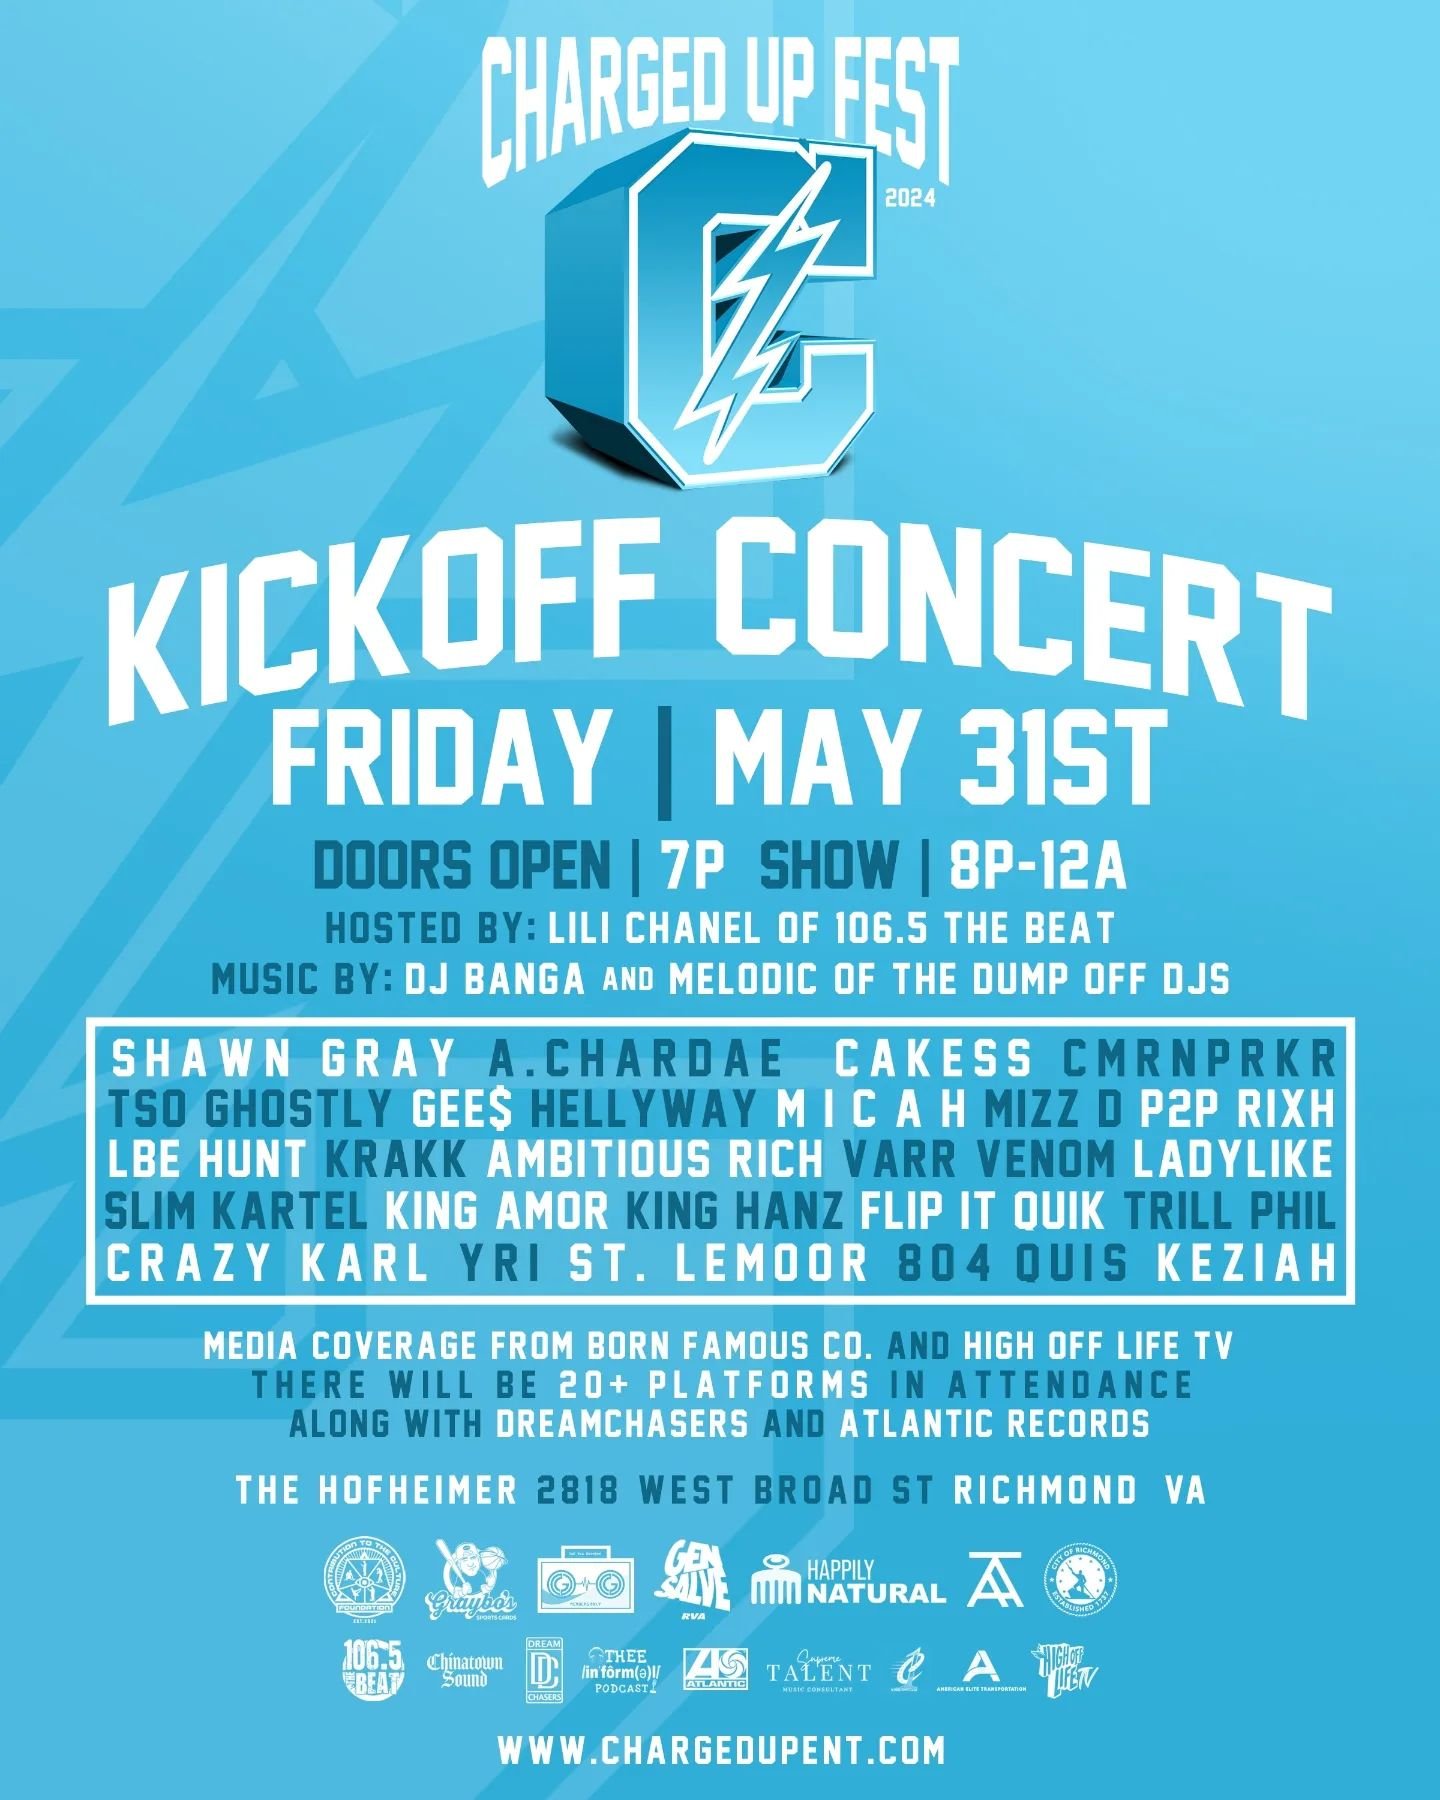 For the First time in History we are bringing 20+ media platforms under one roof to Kick Off Charged Up Fest

Friday May 31st
The Hofheimer
Richmond, VA

Purchase tickets and RSVP for FREE events at www.ChargedUpEnt.com 
.
.
.
.
.
.
#chargedupent #ch